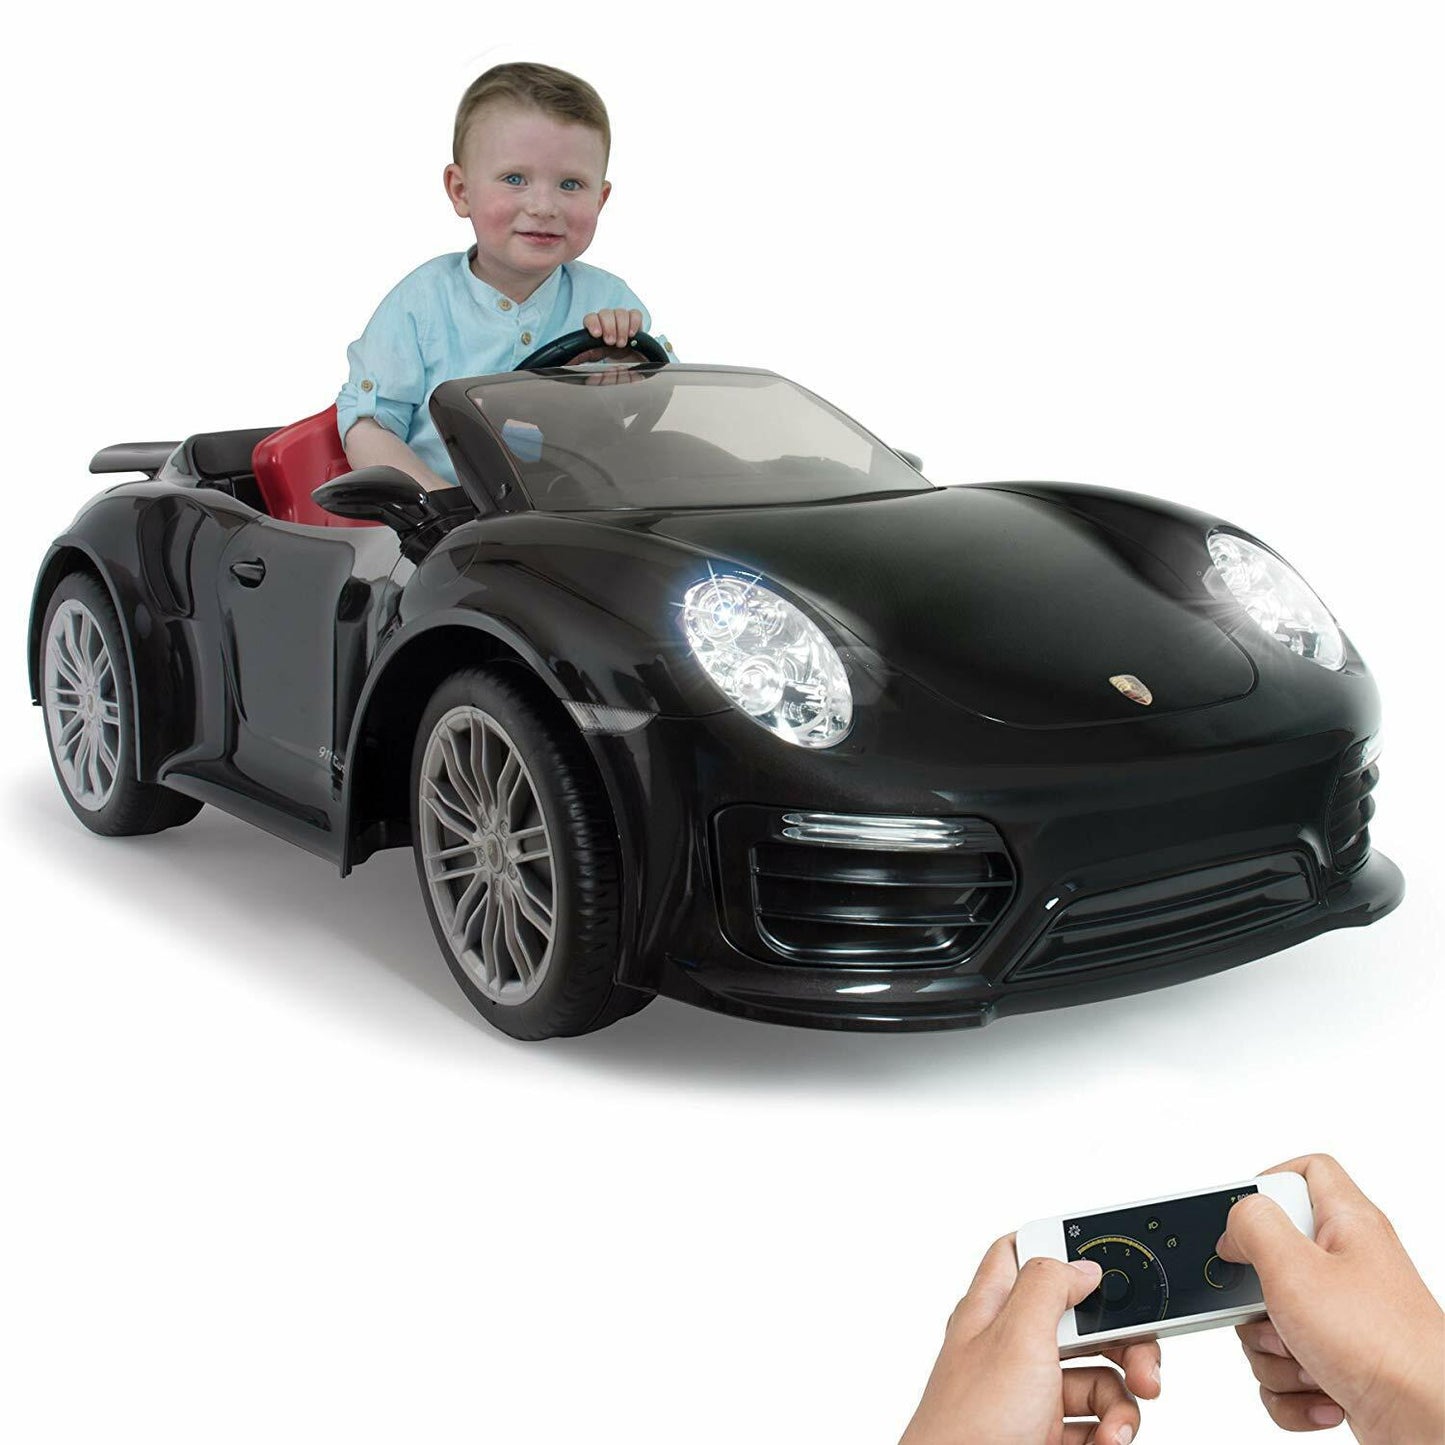 PATOYS | Injusa | Official Licensed Porsche12V Car for Kids 911 Turbo S Special Black Edition Ride on Car Injusa